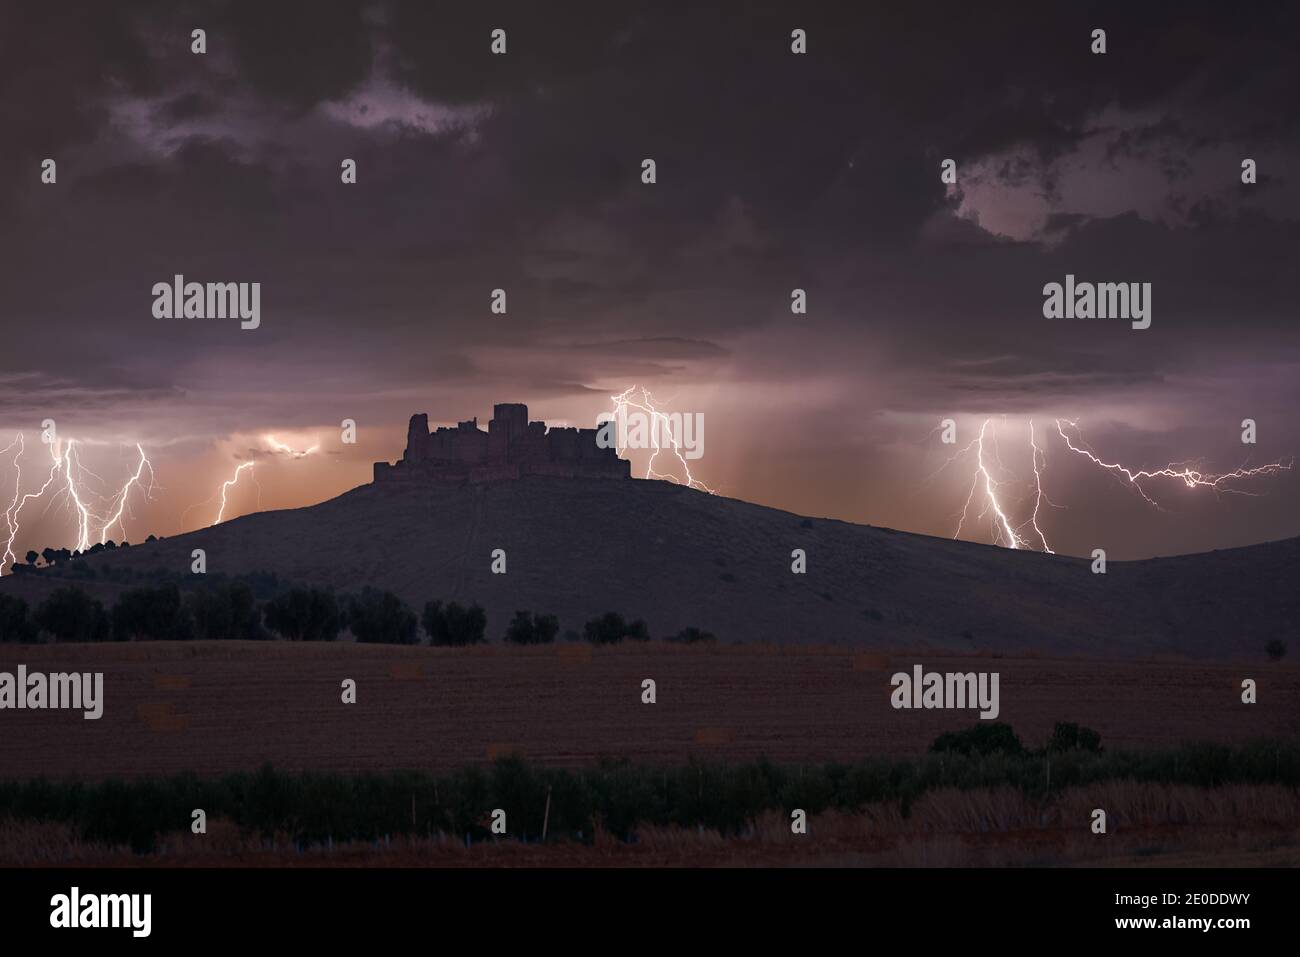 Amazing view of dark thunderstorm sky with bright lightnings striking above stone fortress on hill in  mountains Stock Photo